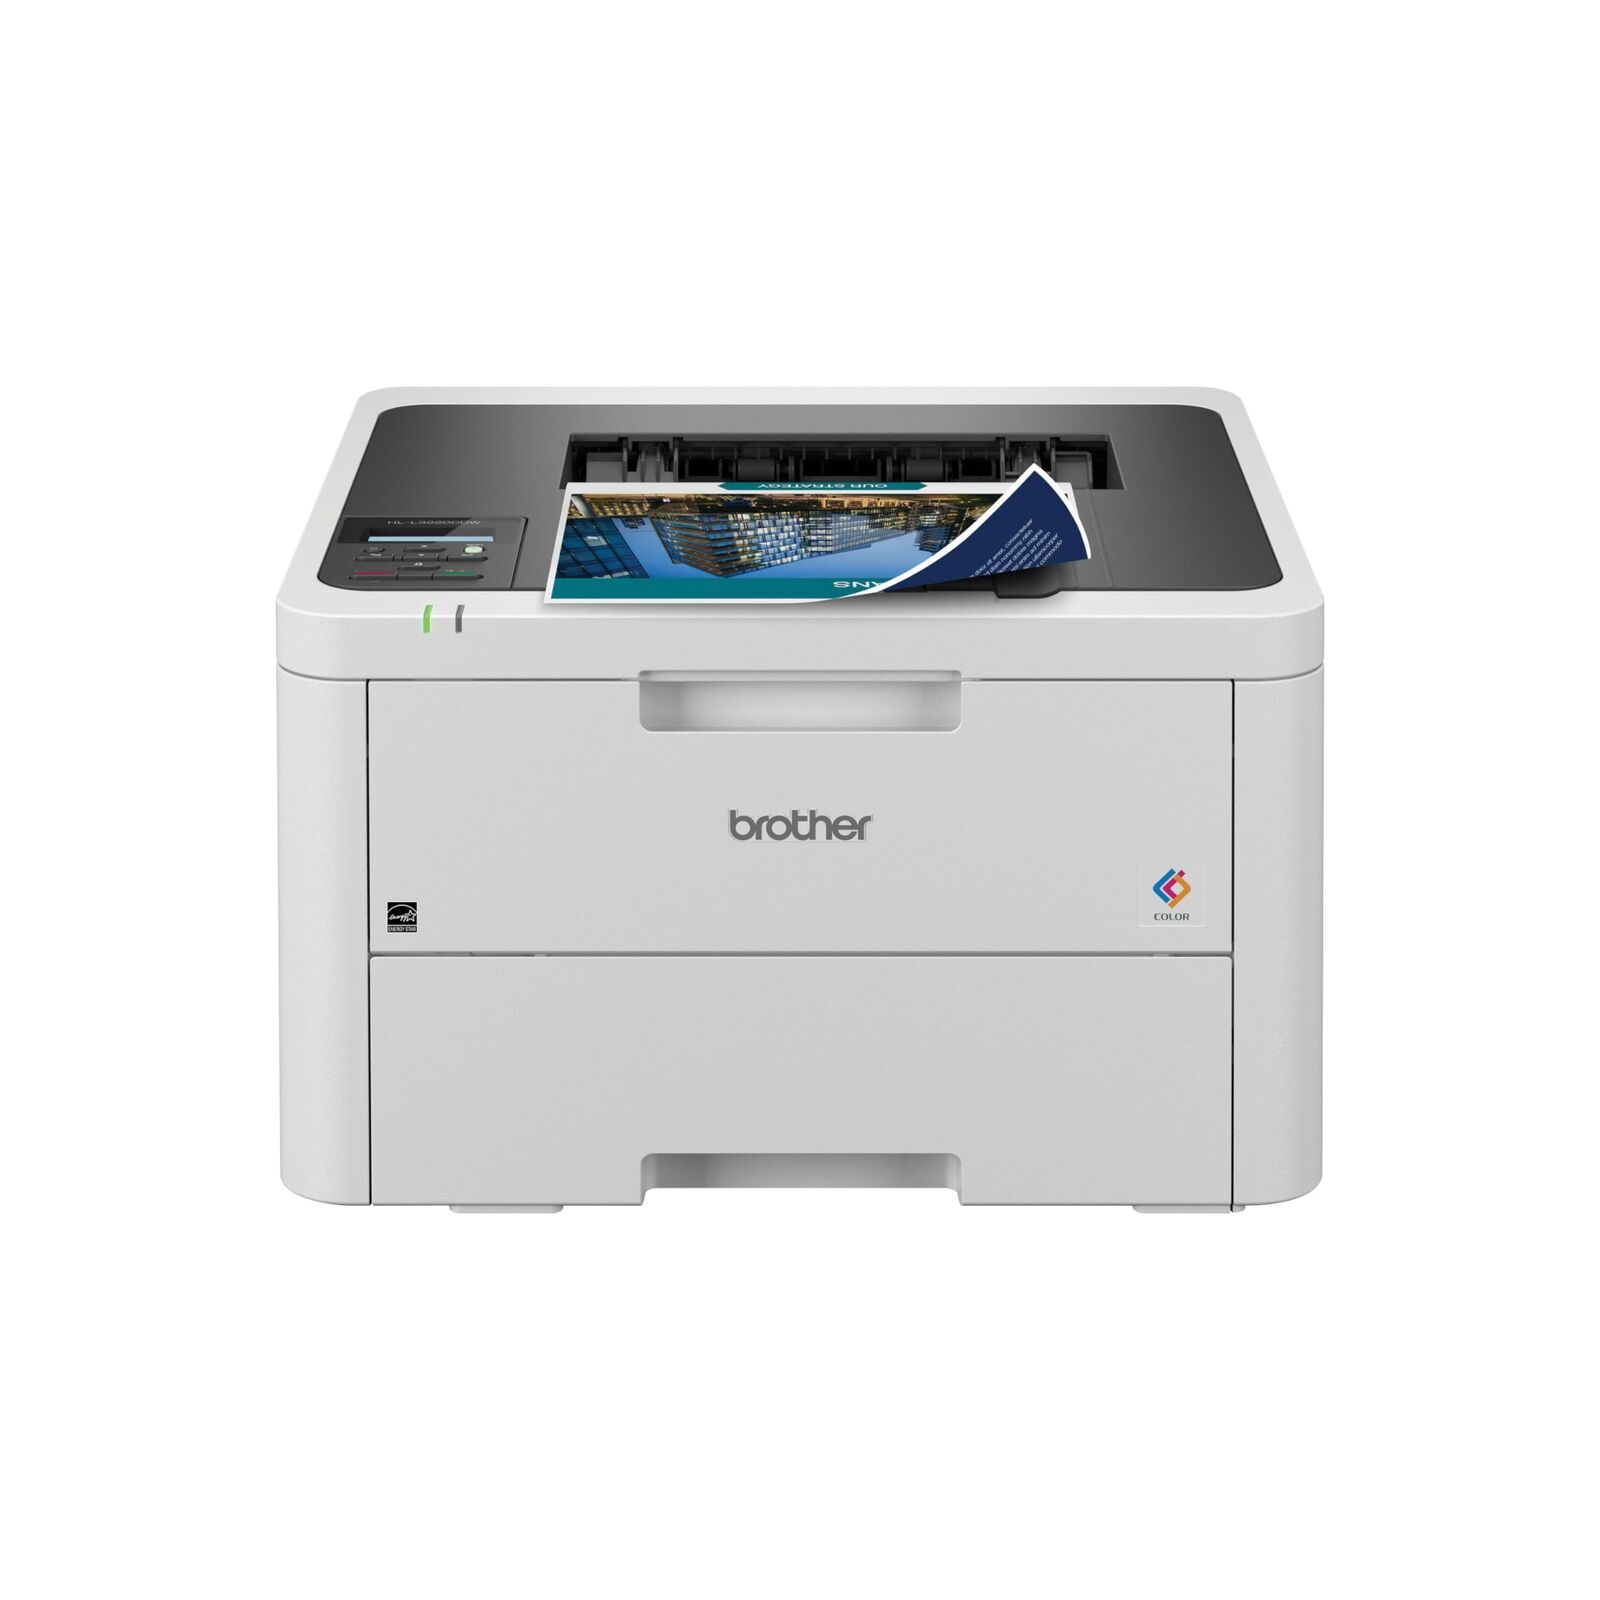 Brother Professional Wireless Compact Digital Color Printer with Laser Quality